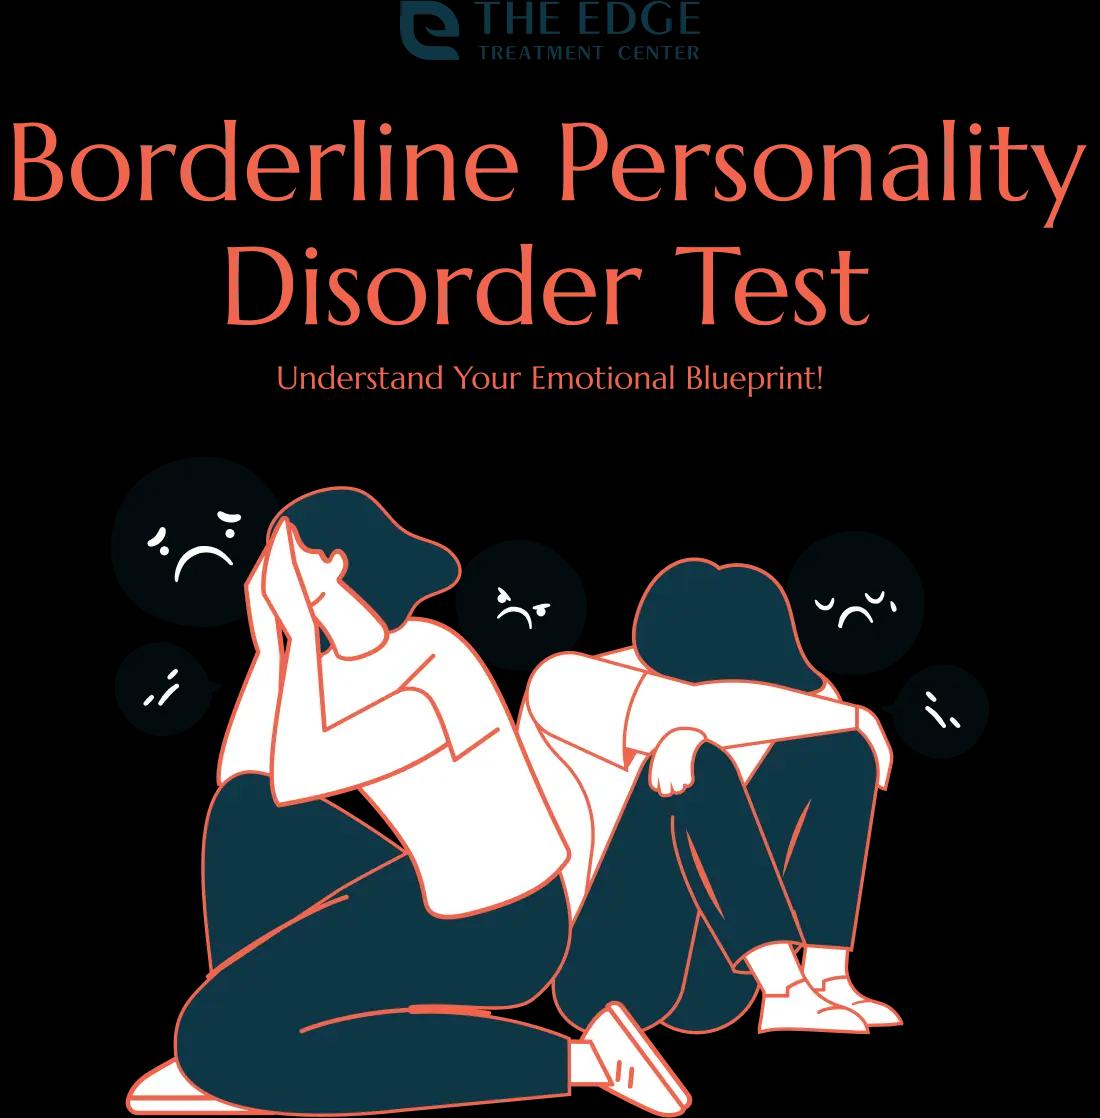 borderline-personality-disorder-test-cover-image